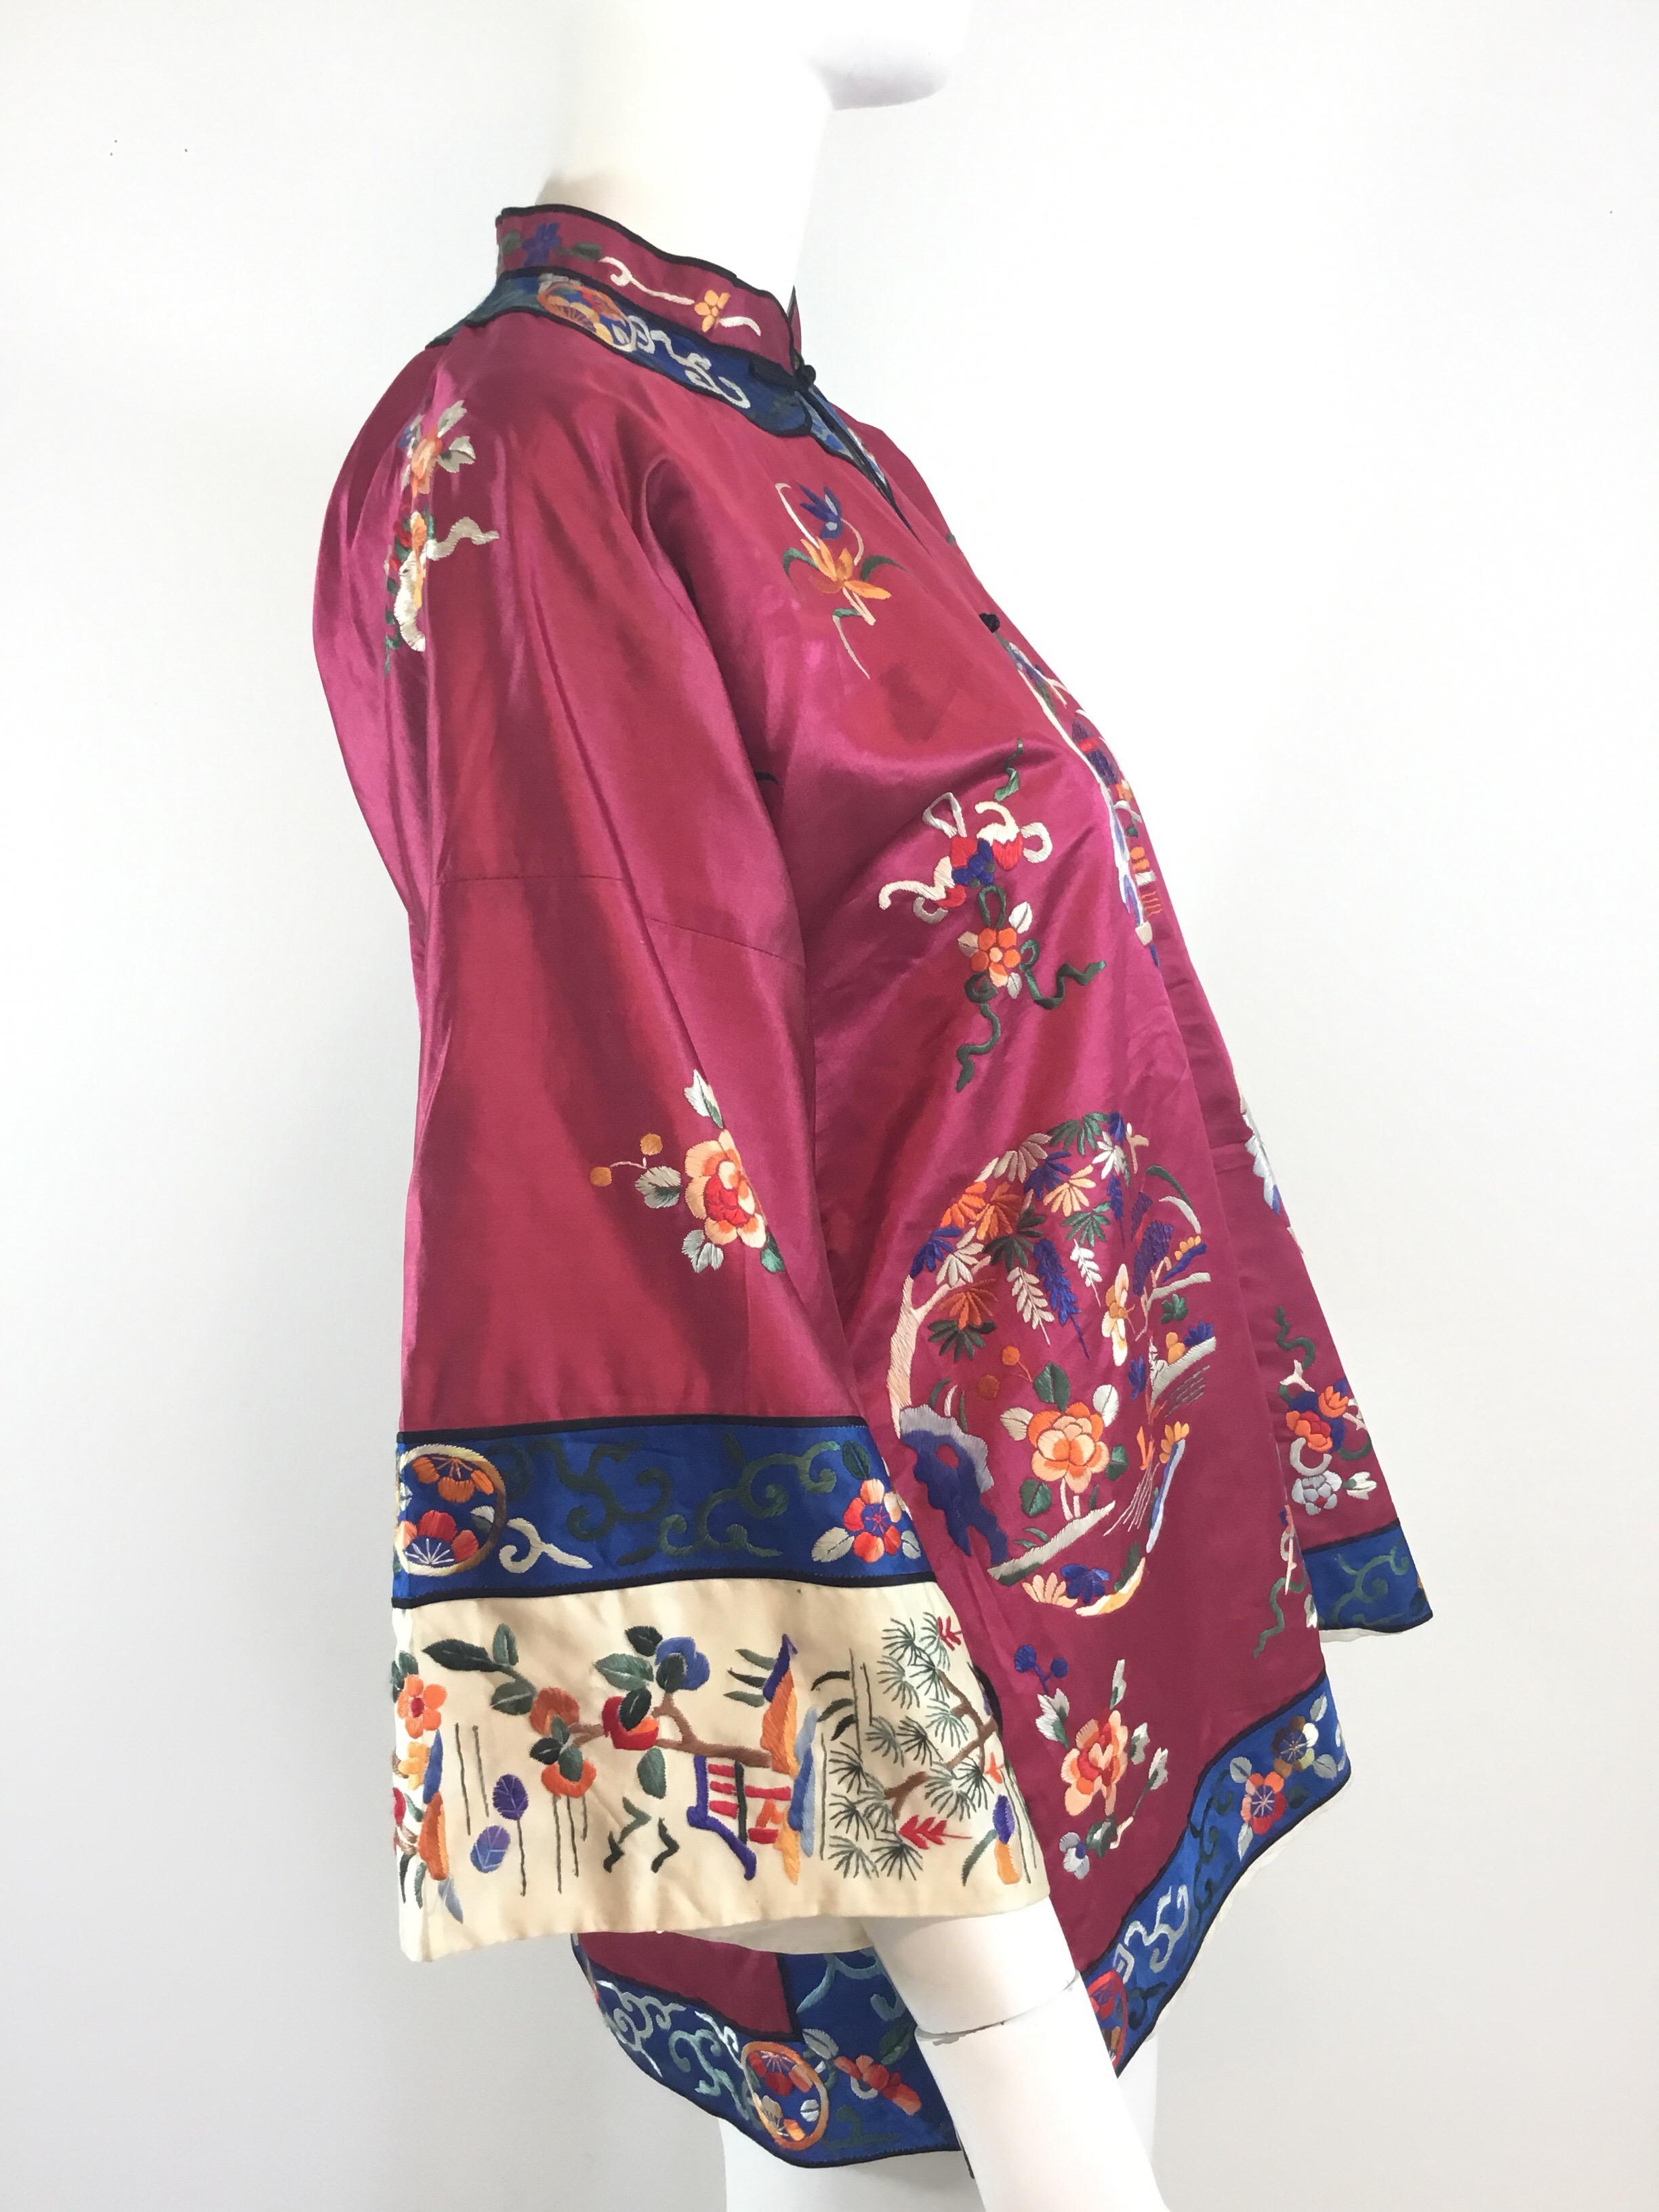 Women's Chinese Silk Embroidered Jacket, Circa 1920